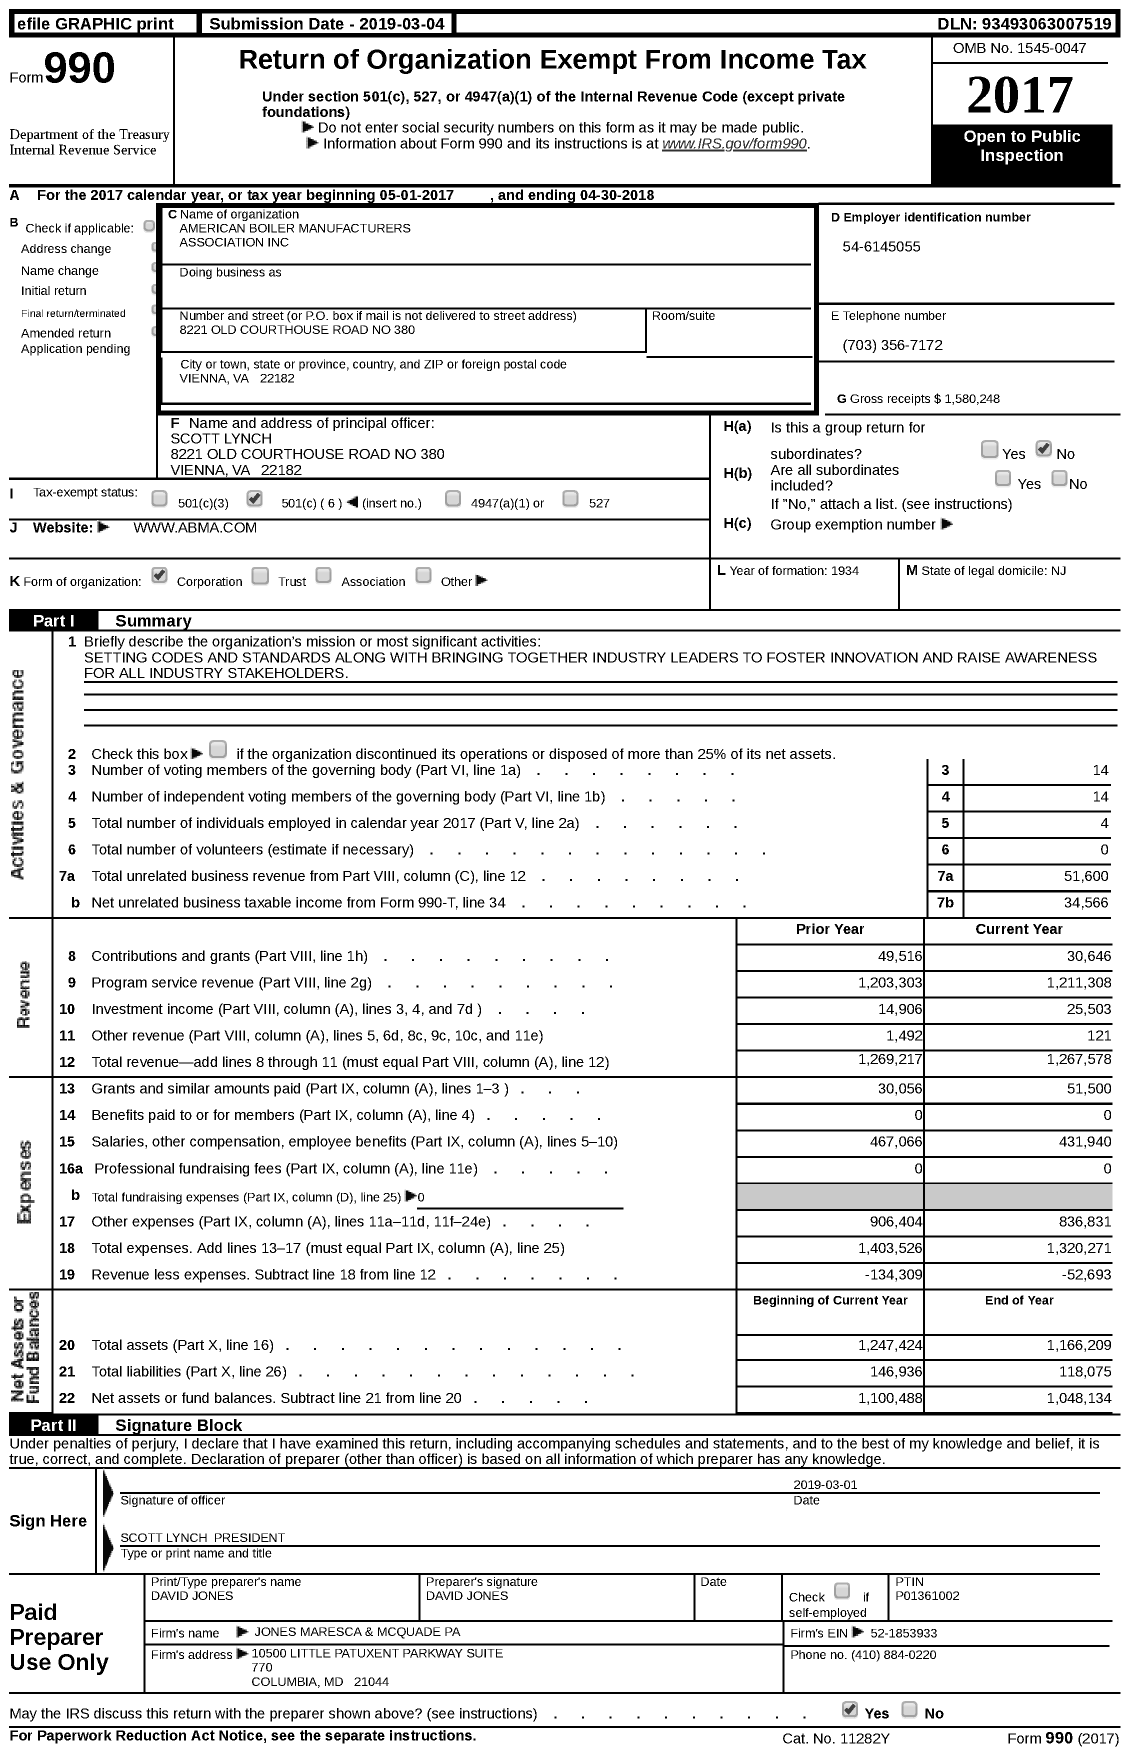 Image of first page of 2017 Form 990 for American Boiler Manufacturers Association (ABMA)